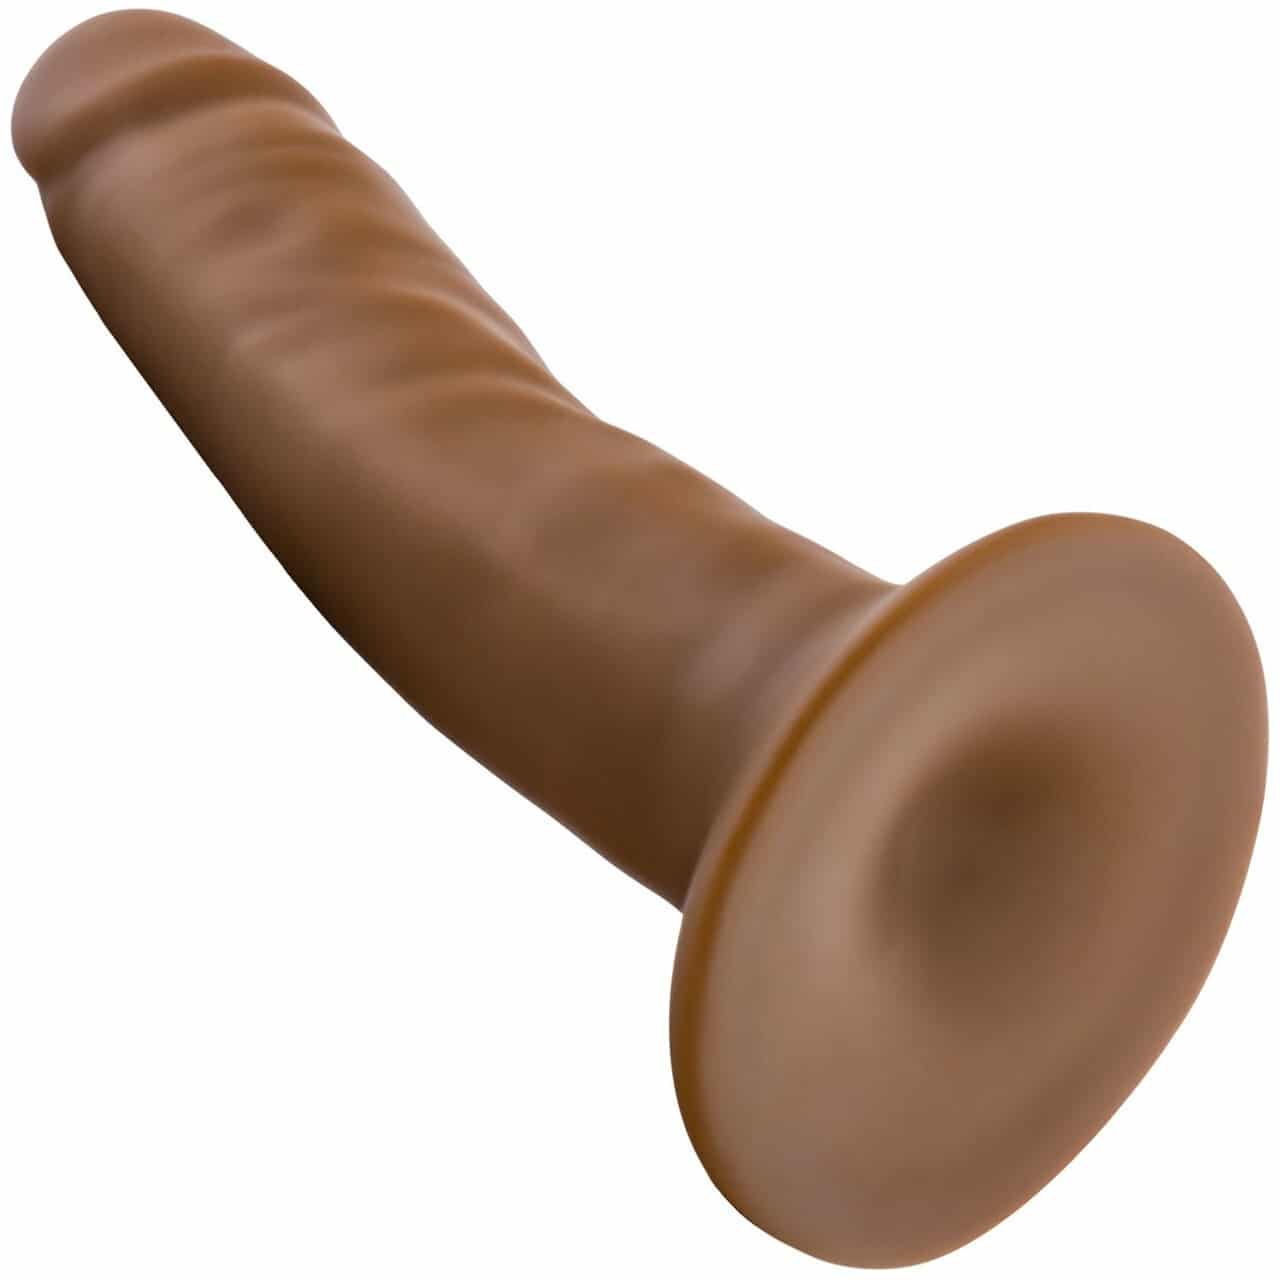 Blush Dr. Skin 5.5-Inch Dildo With Suction Cup. Slide 5